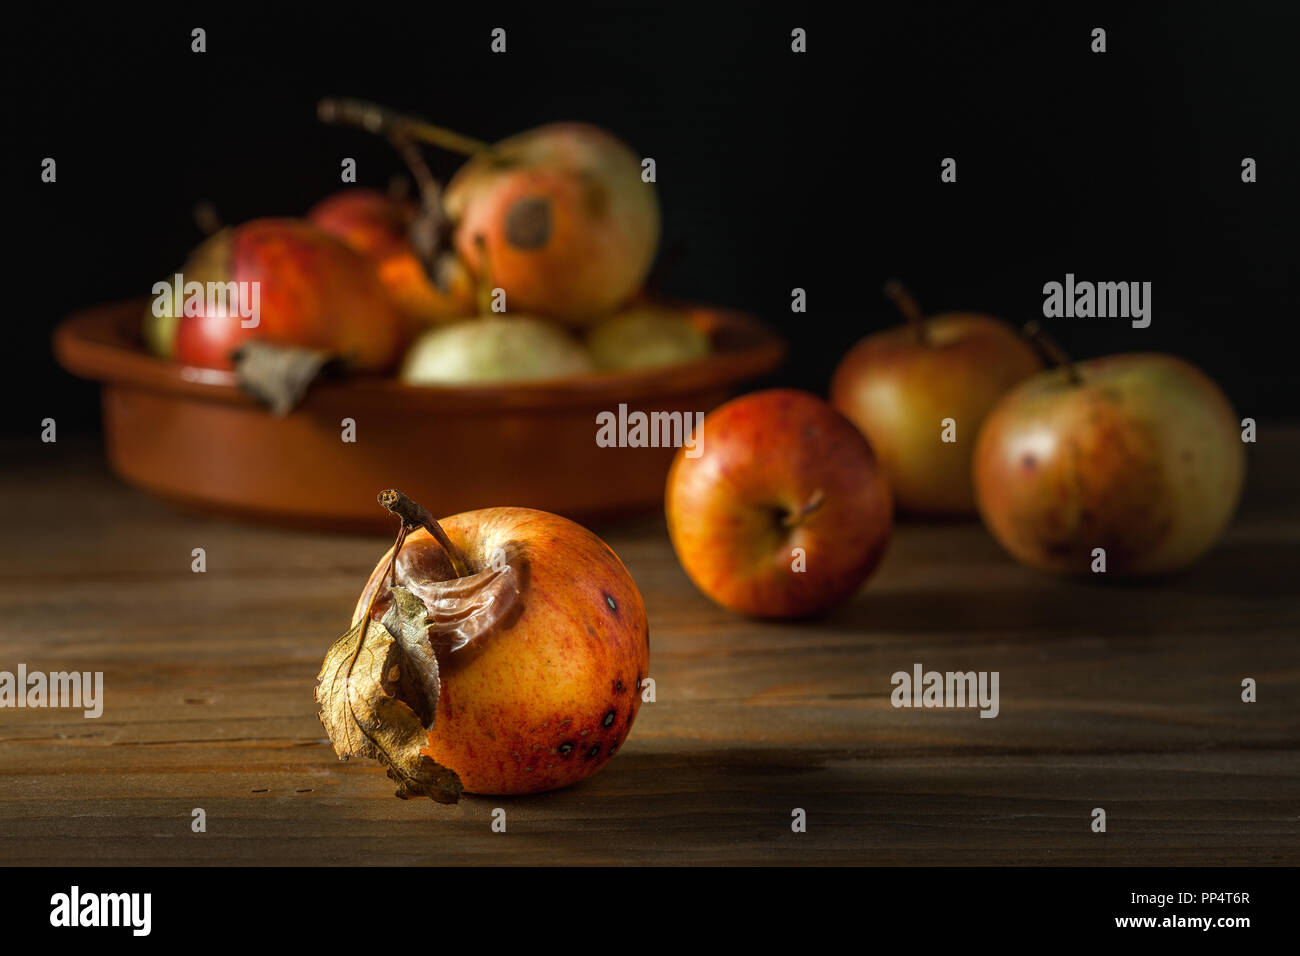 Genuine and organic rotten apples on a wooden table Stock Photo